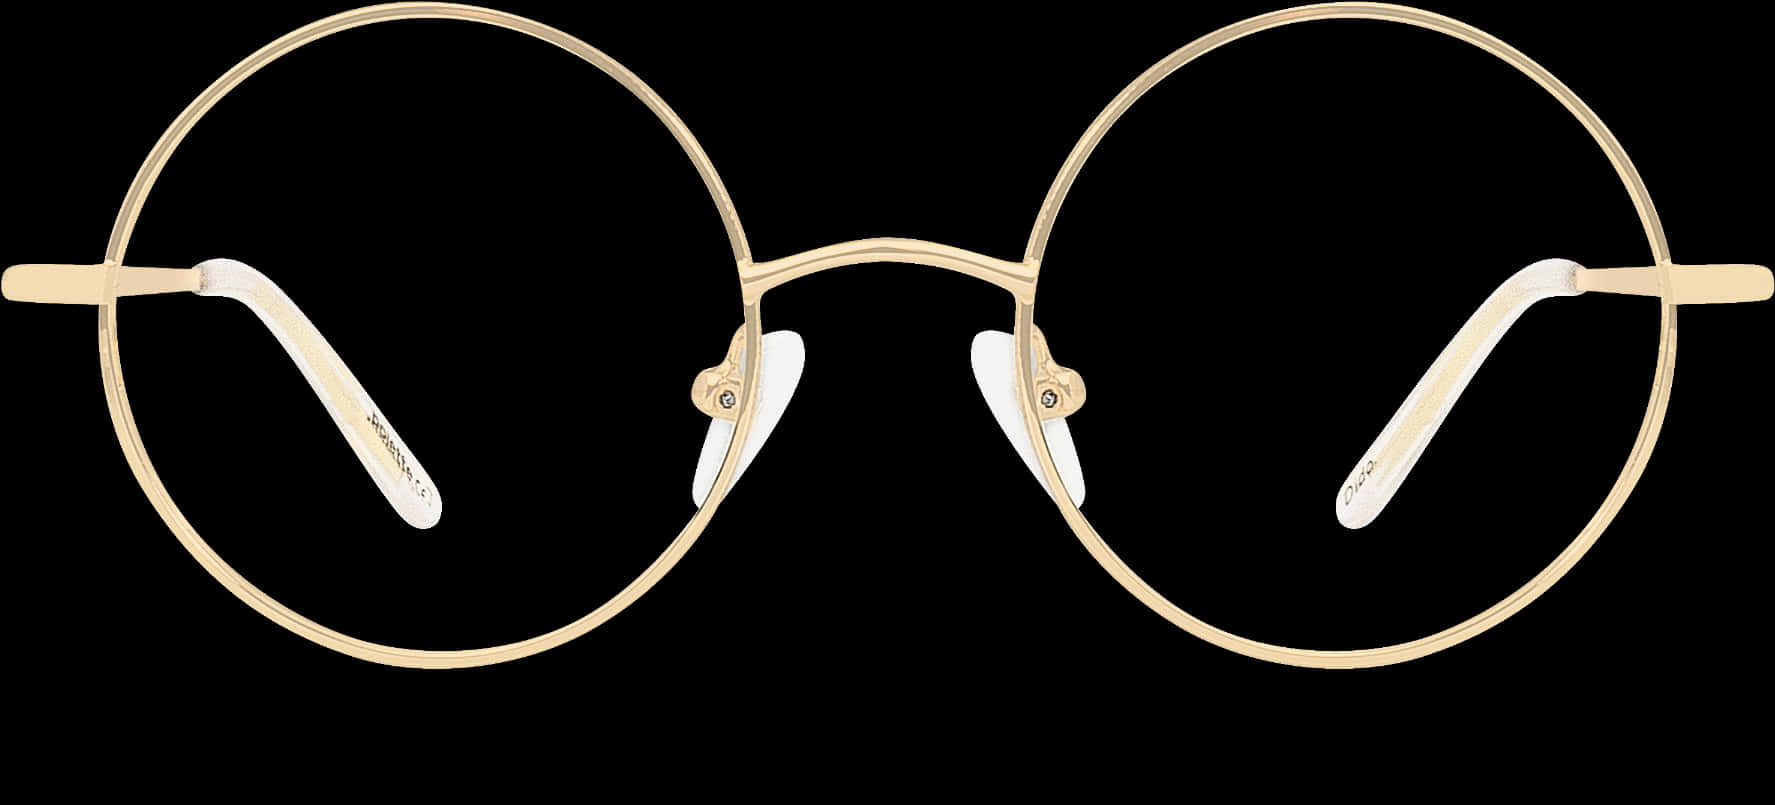 A Close Up Of A Pair Of Glasses